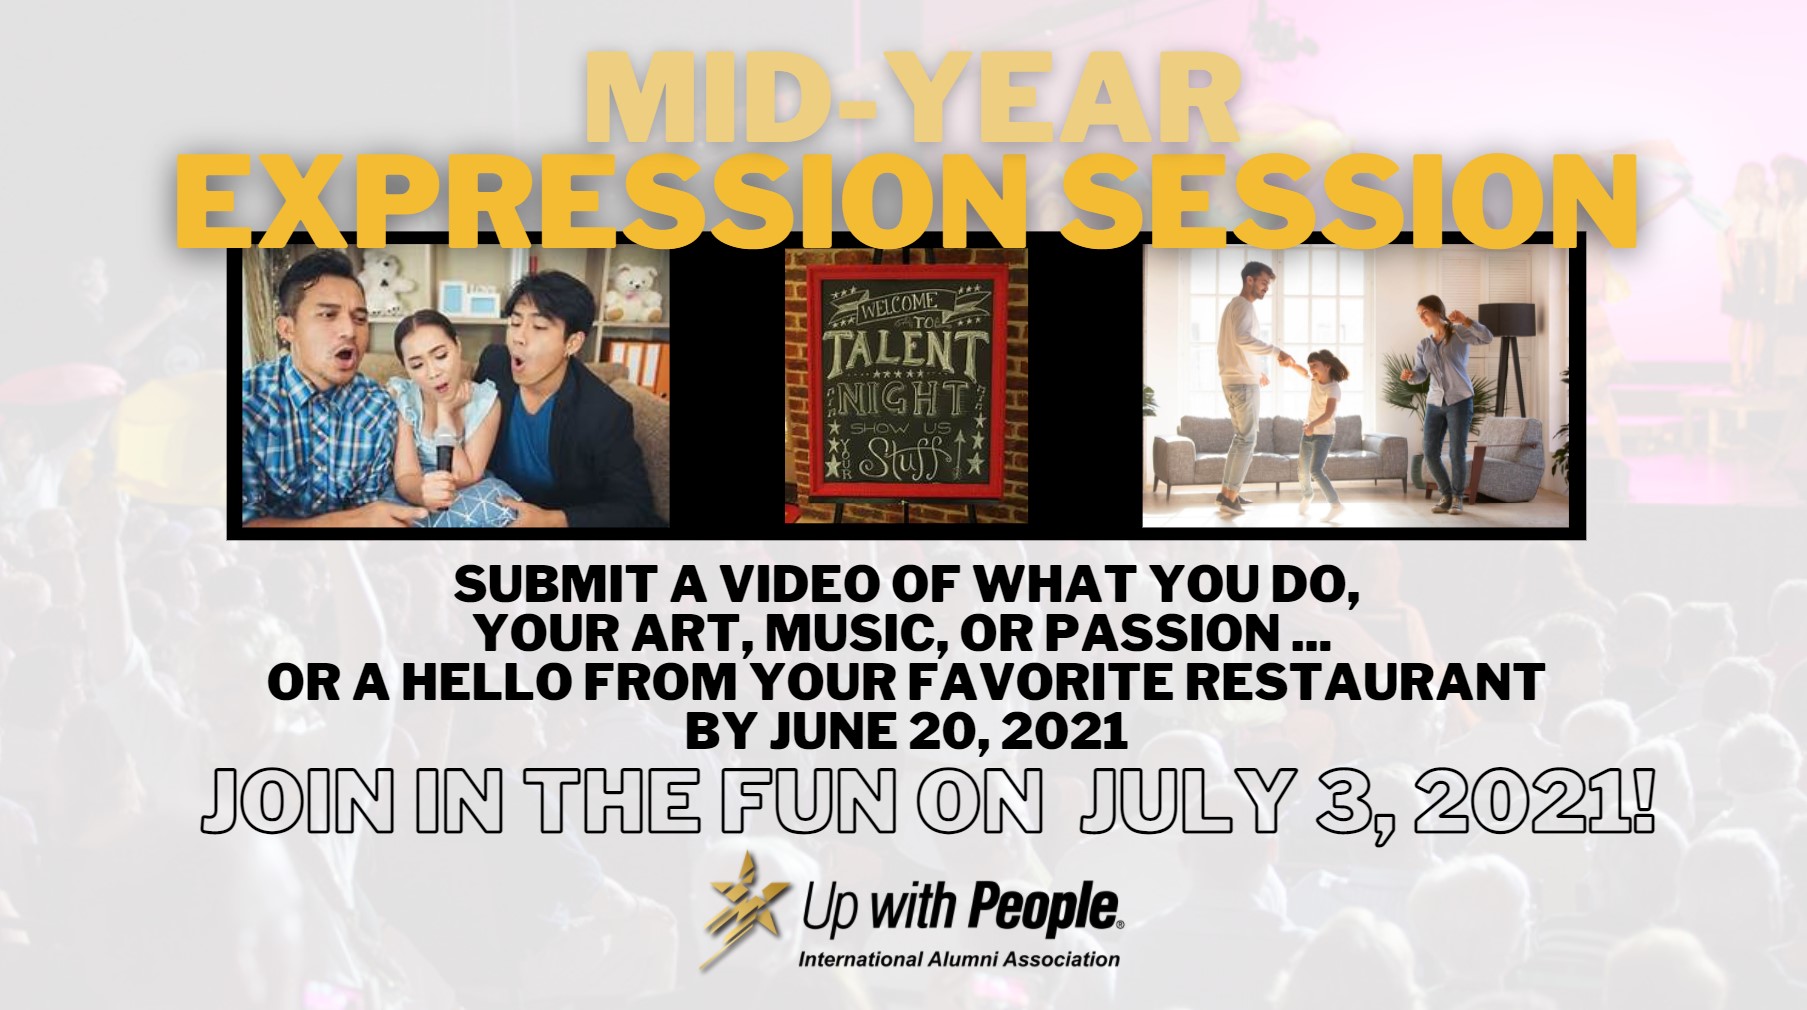 Mid Year Expression Session Submit a video of what you do, your art, music or passion... or a hello from your favorite restaurant by June 20, 2021. Join the fun on July 3, 2021